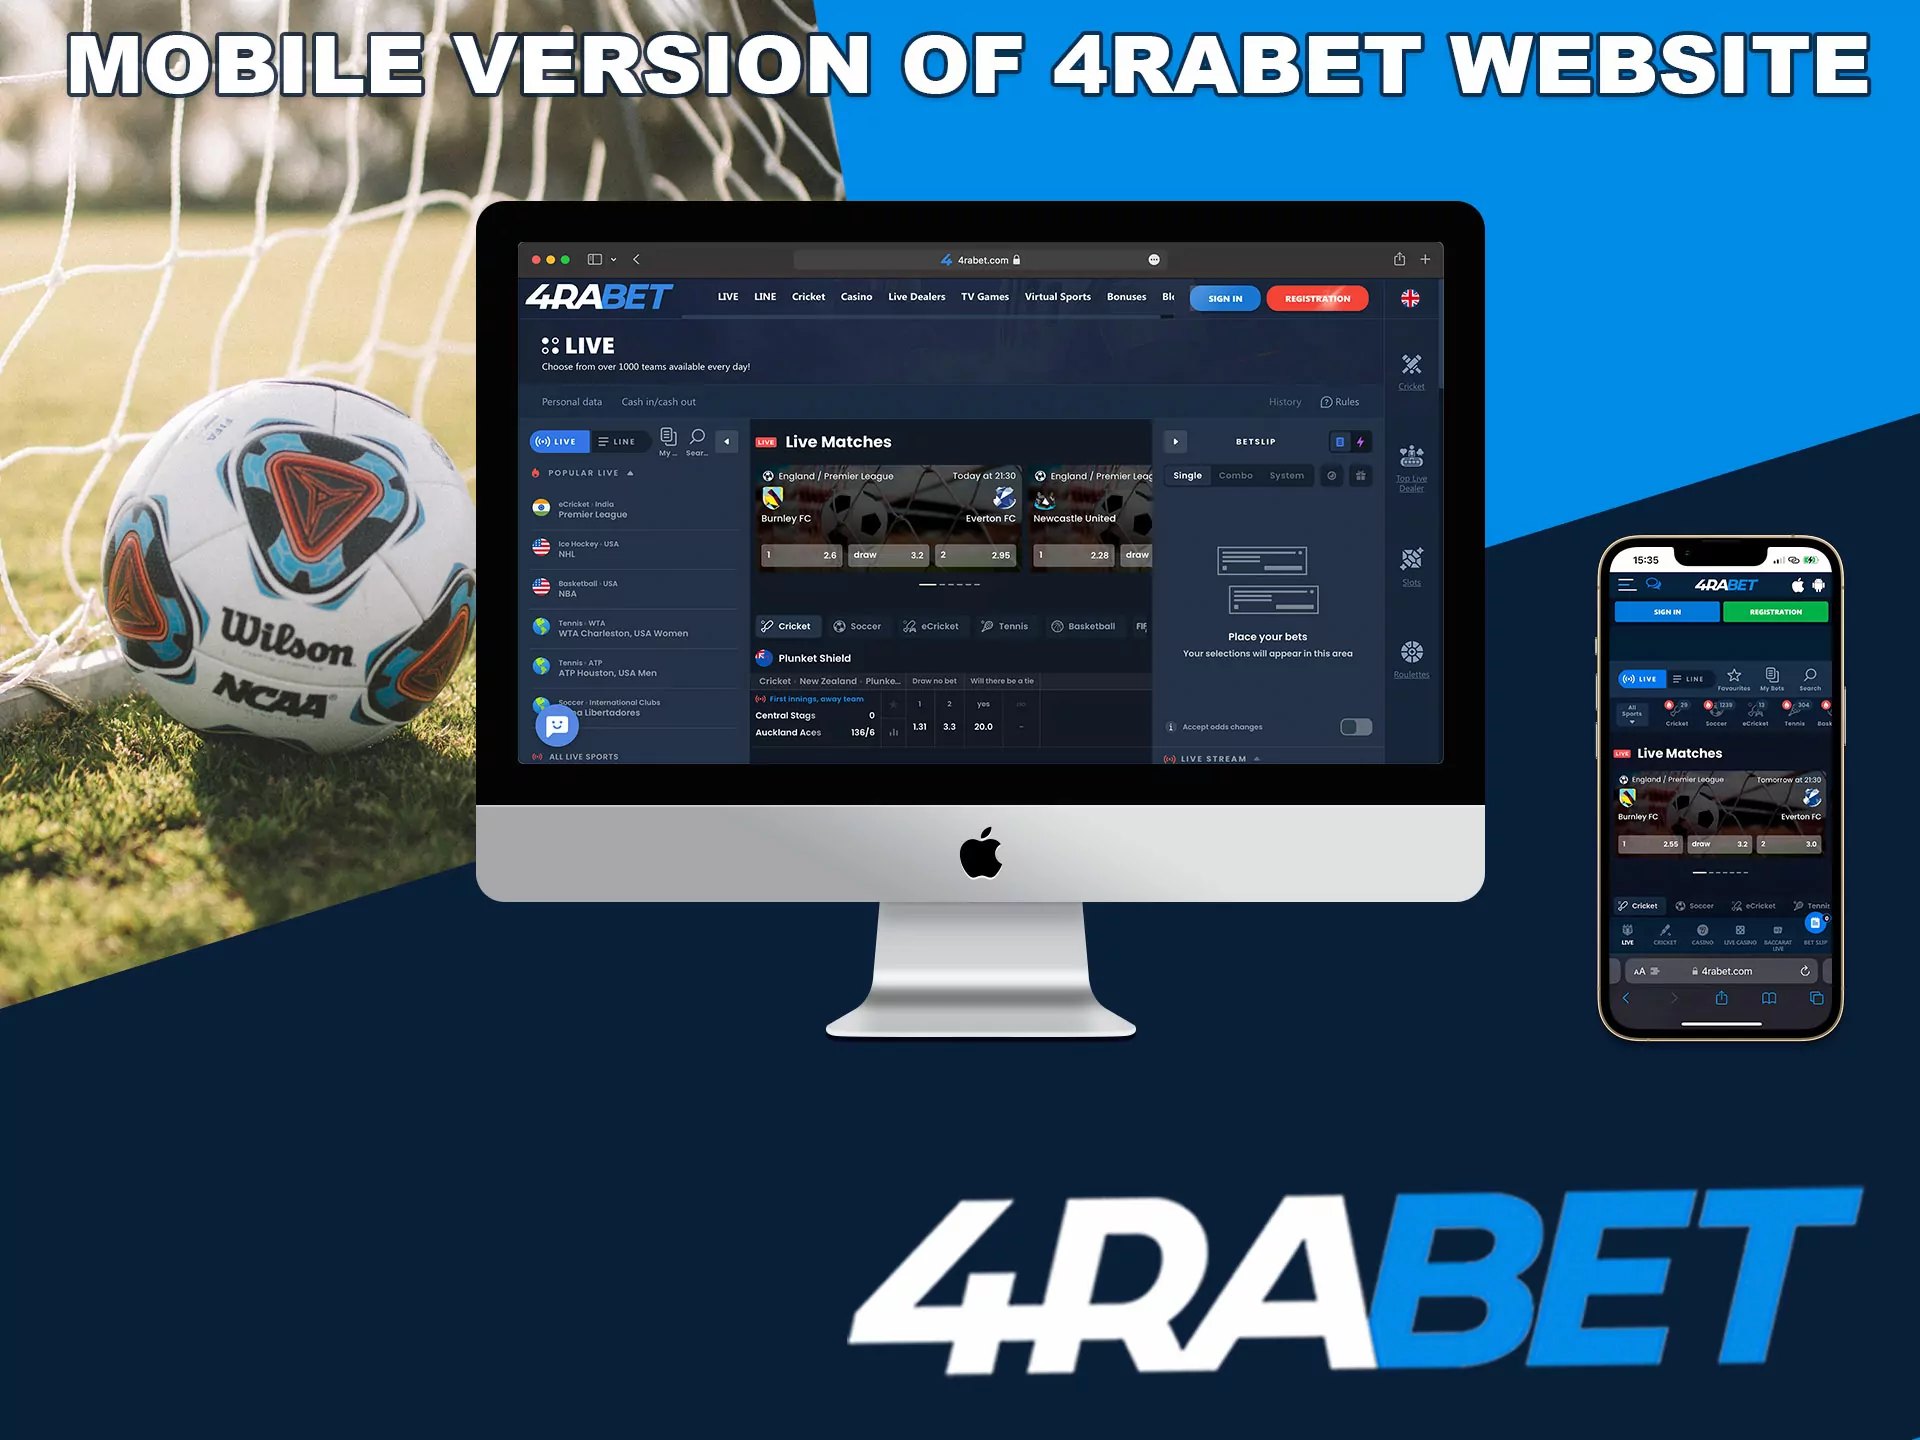 How to use 4rabet if the application cannot be installed or it does not start.